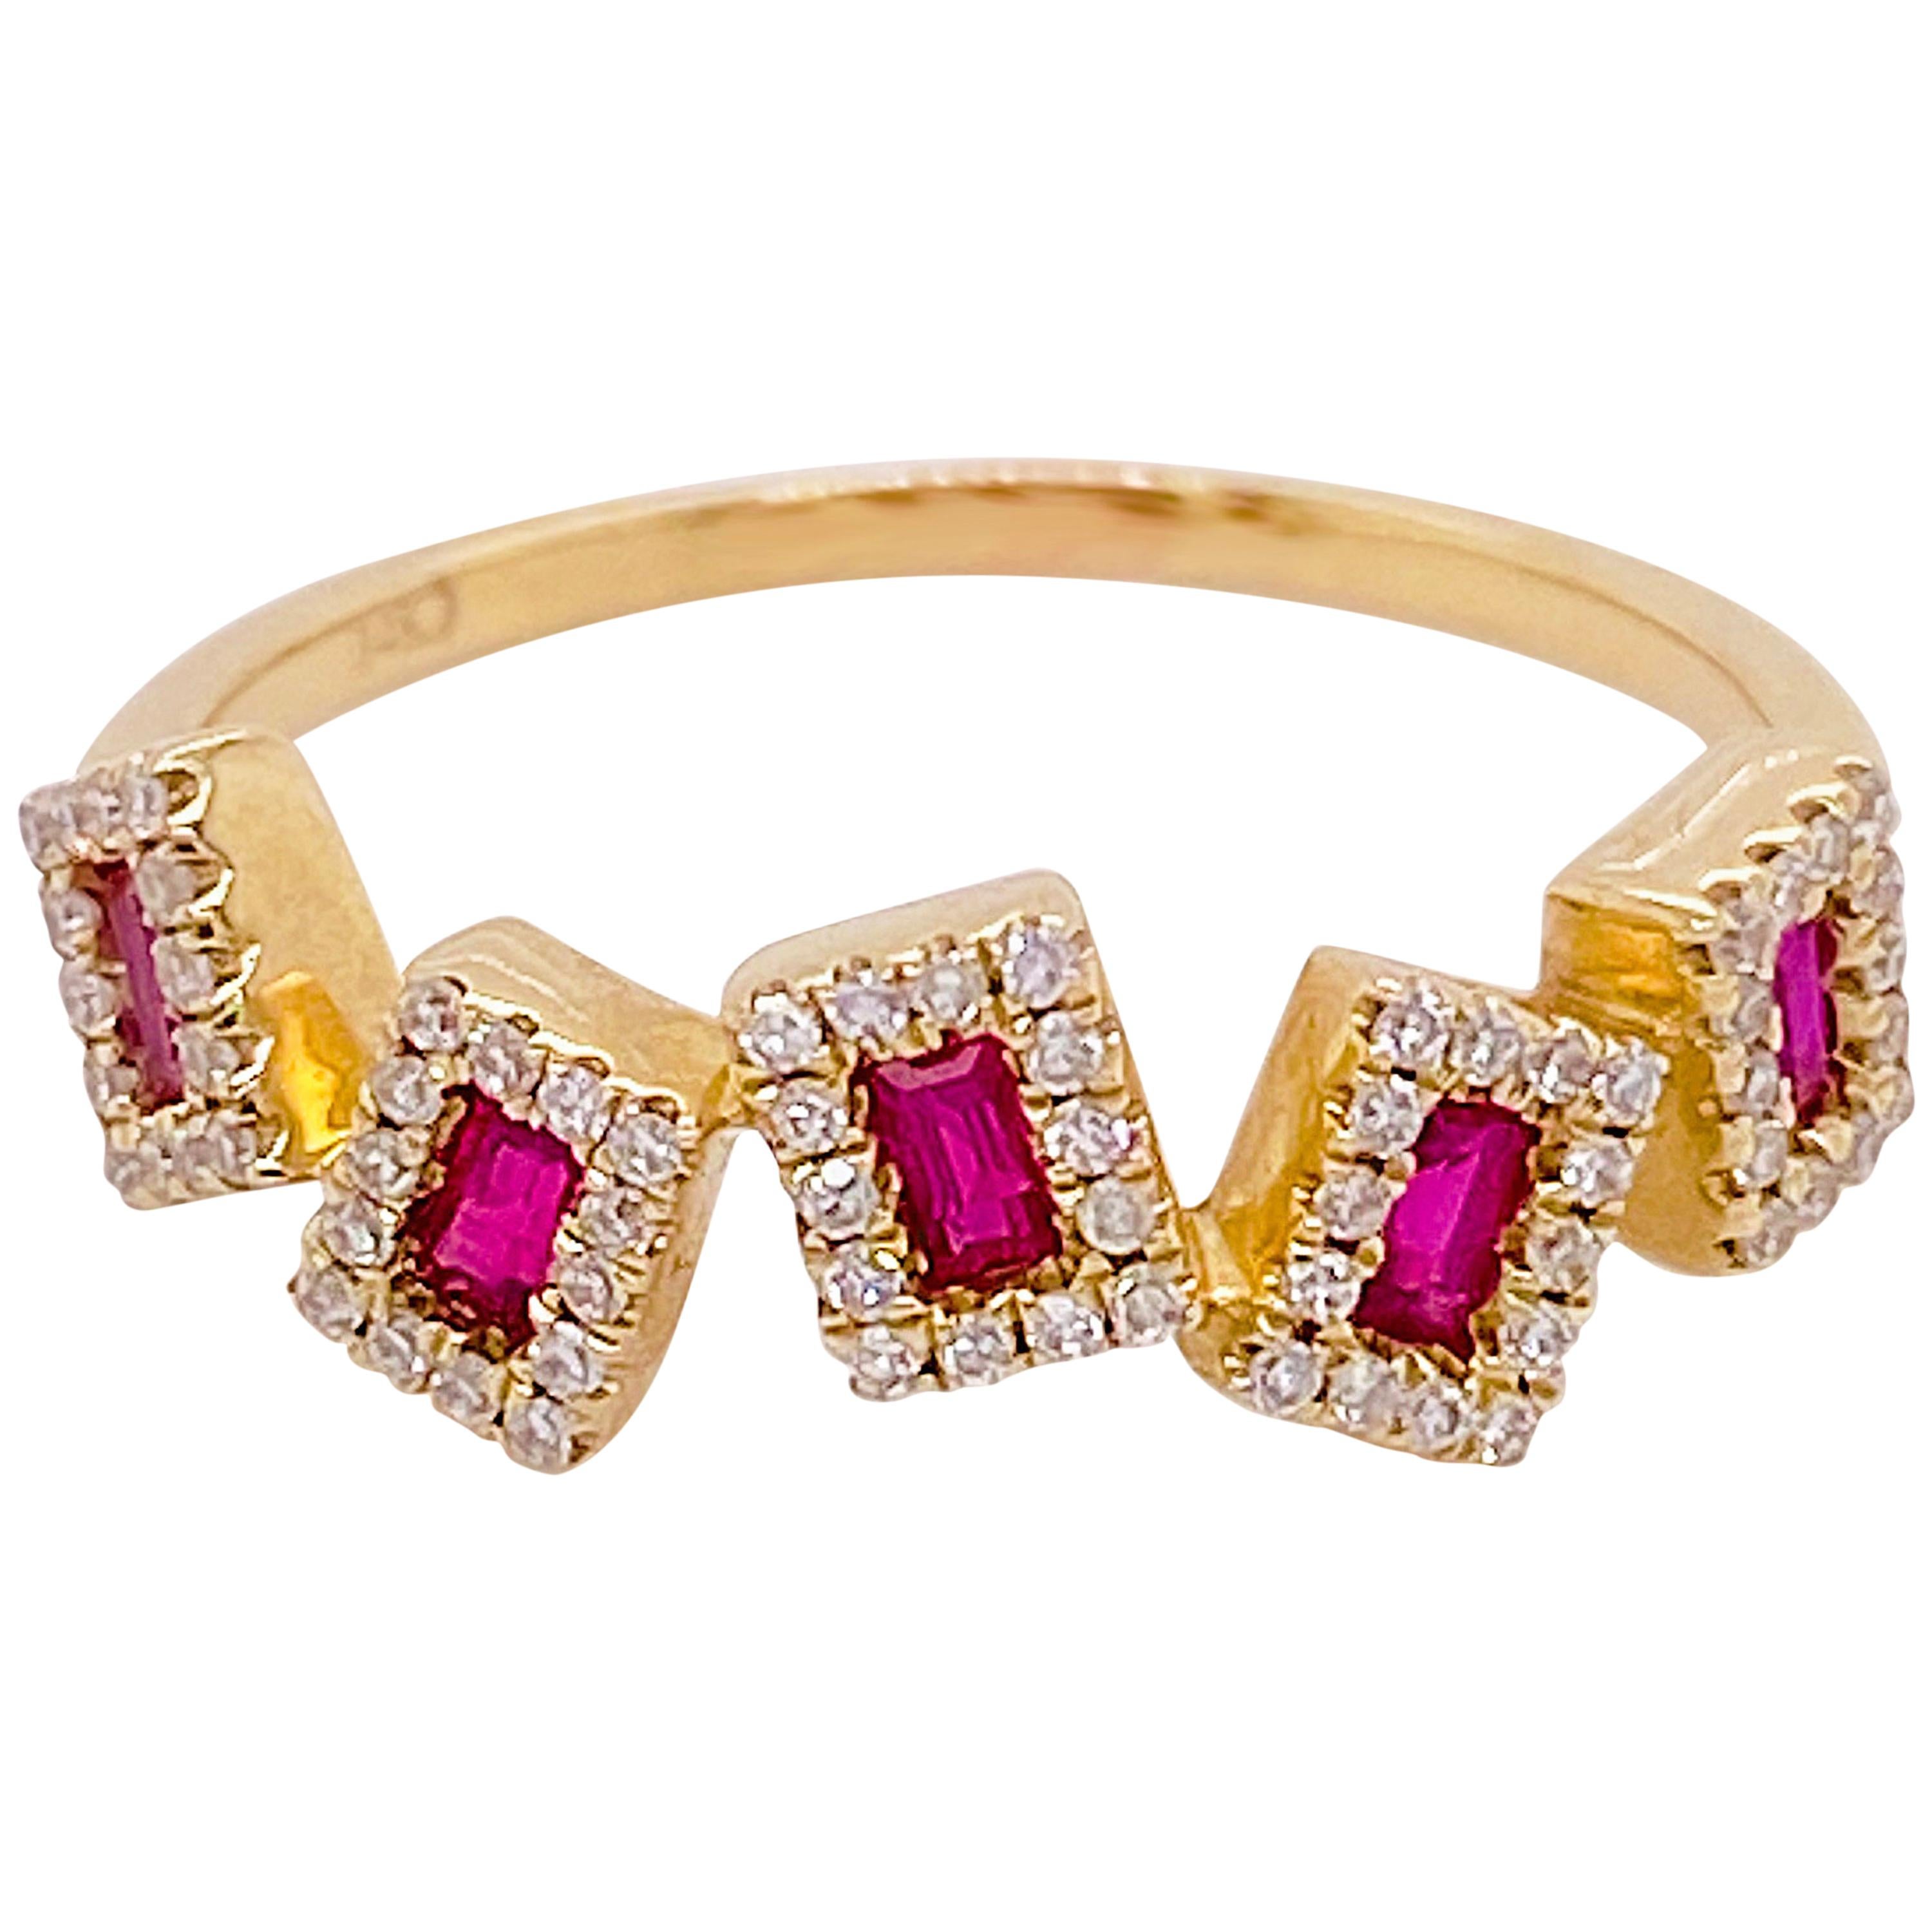 Dancing Ruby Rectangles Ring, Ruby and Diamond, 14K Yellow Gold, Artistic For Sale